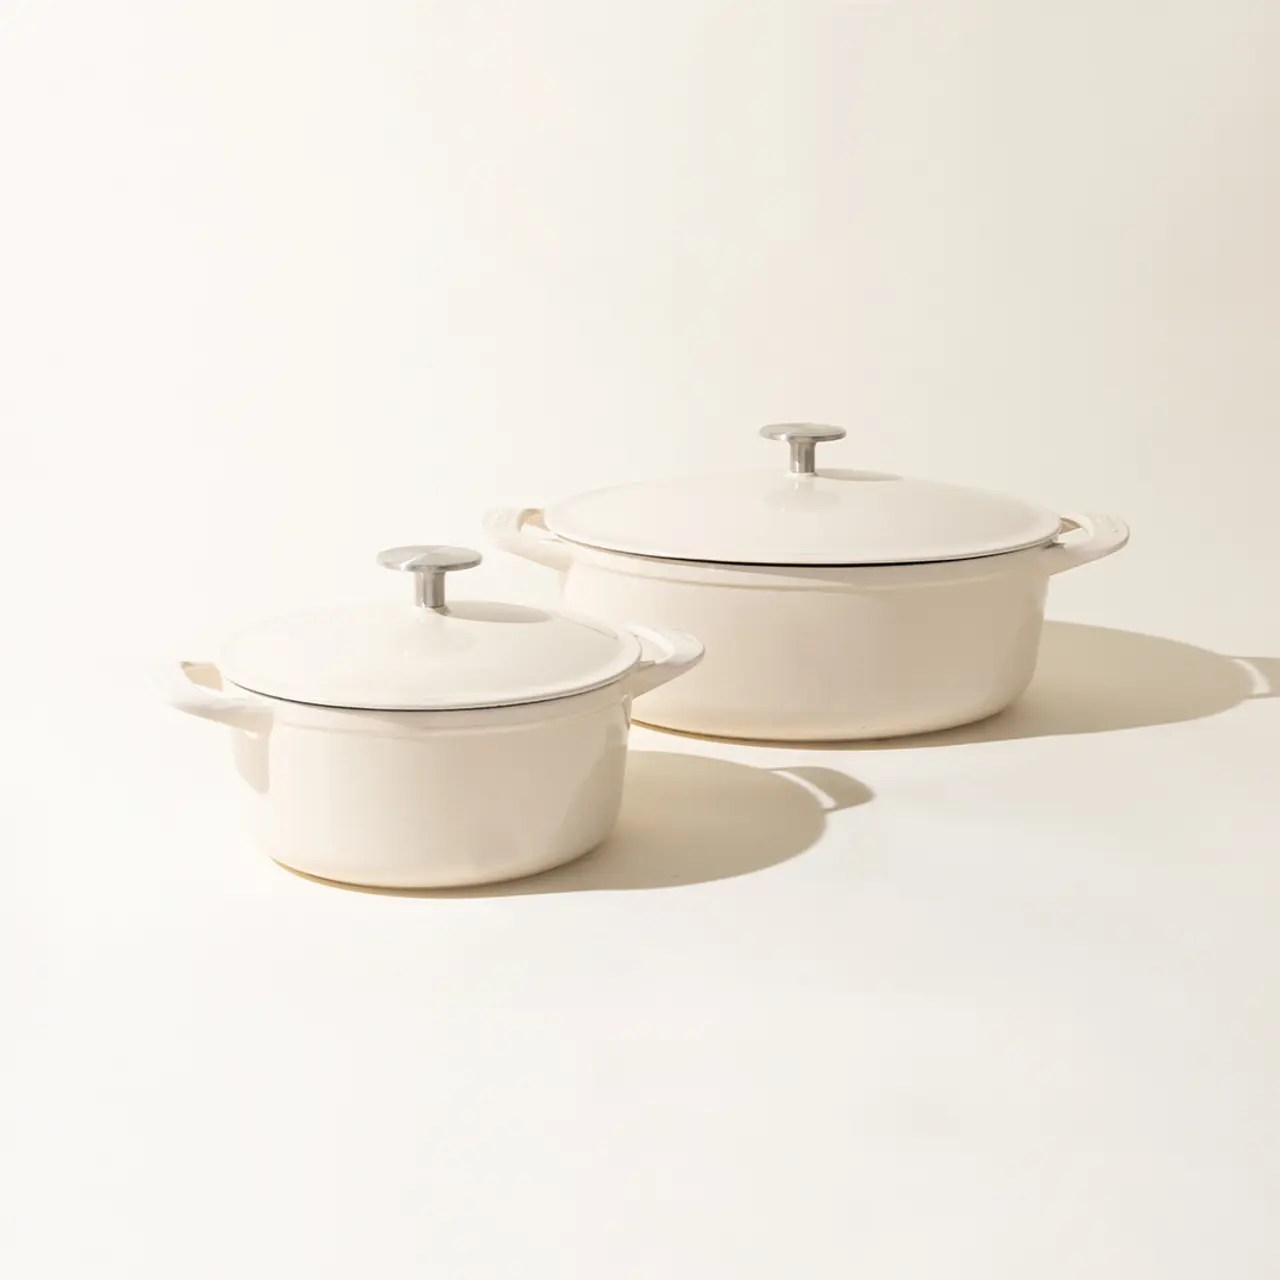 Two off-white cooking pots with lids on a light background, one larger than the other, casting soft shadows to the right.